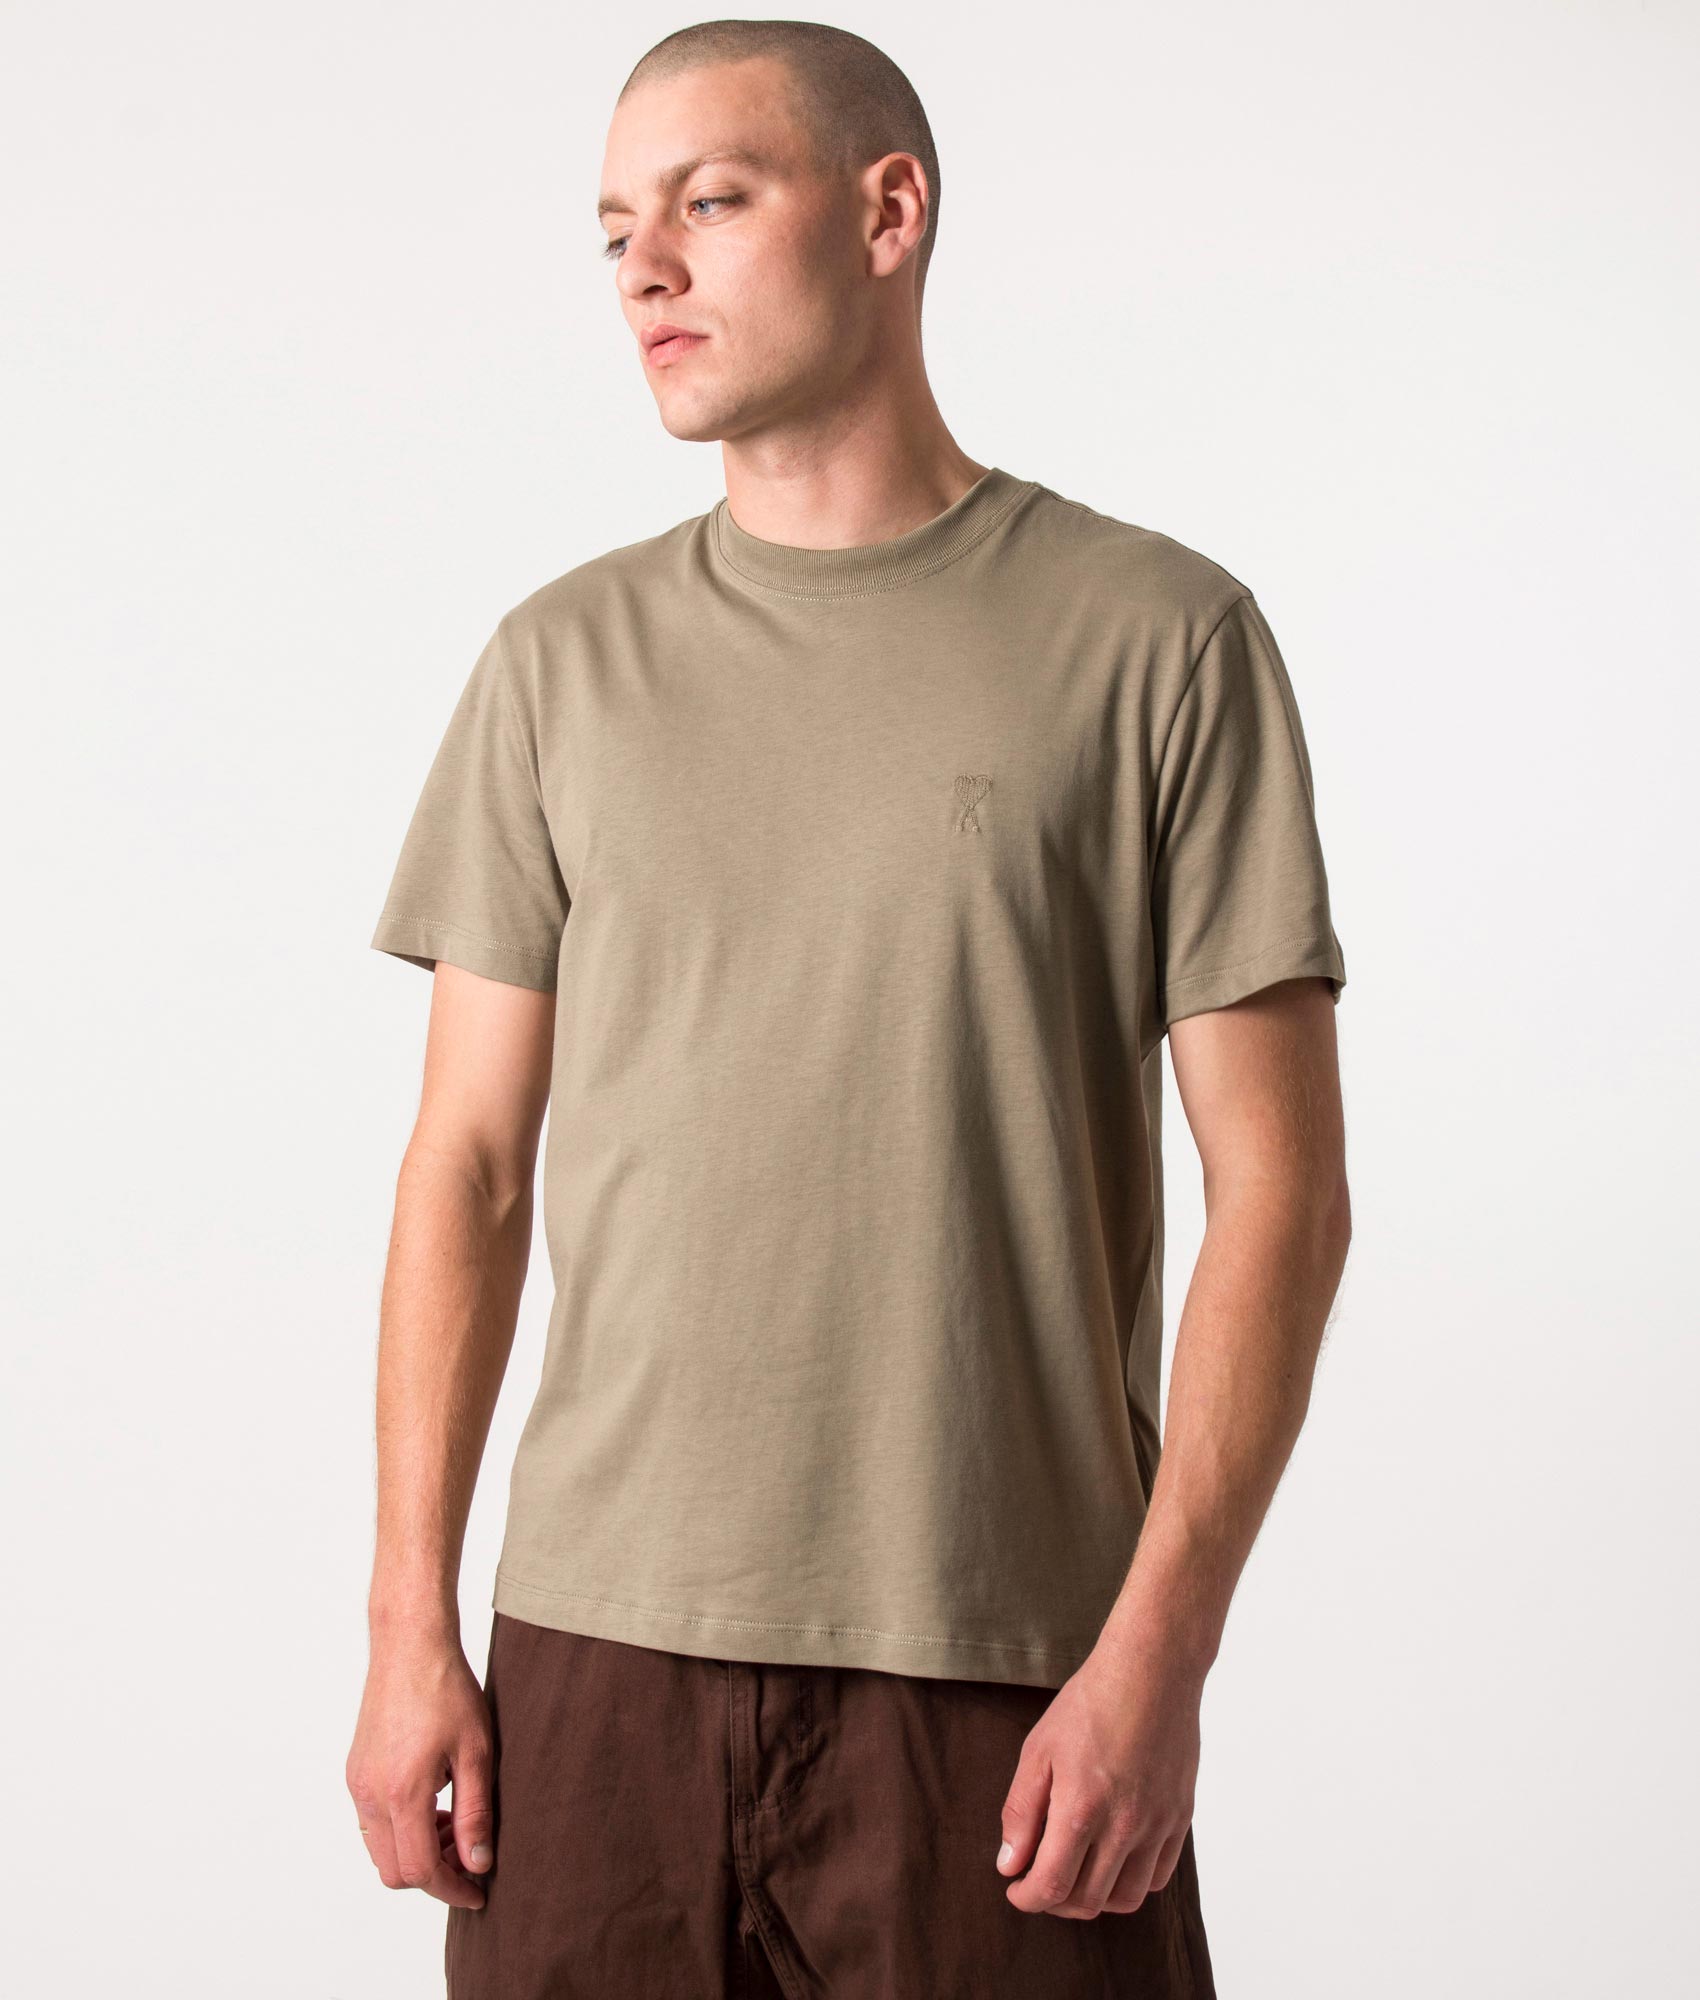 AMI Mens ADC T-Shirt - Colour: 281 Taupe - Size: Large